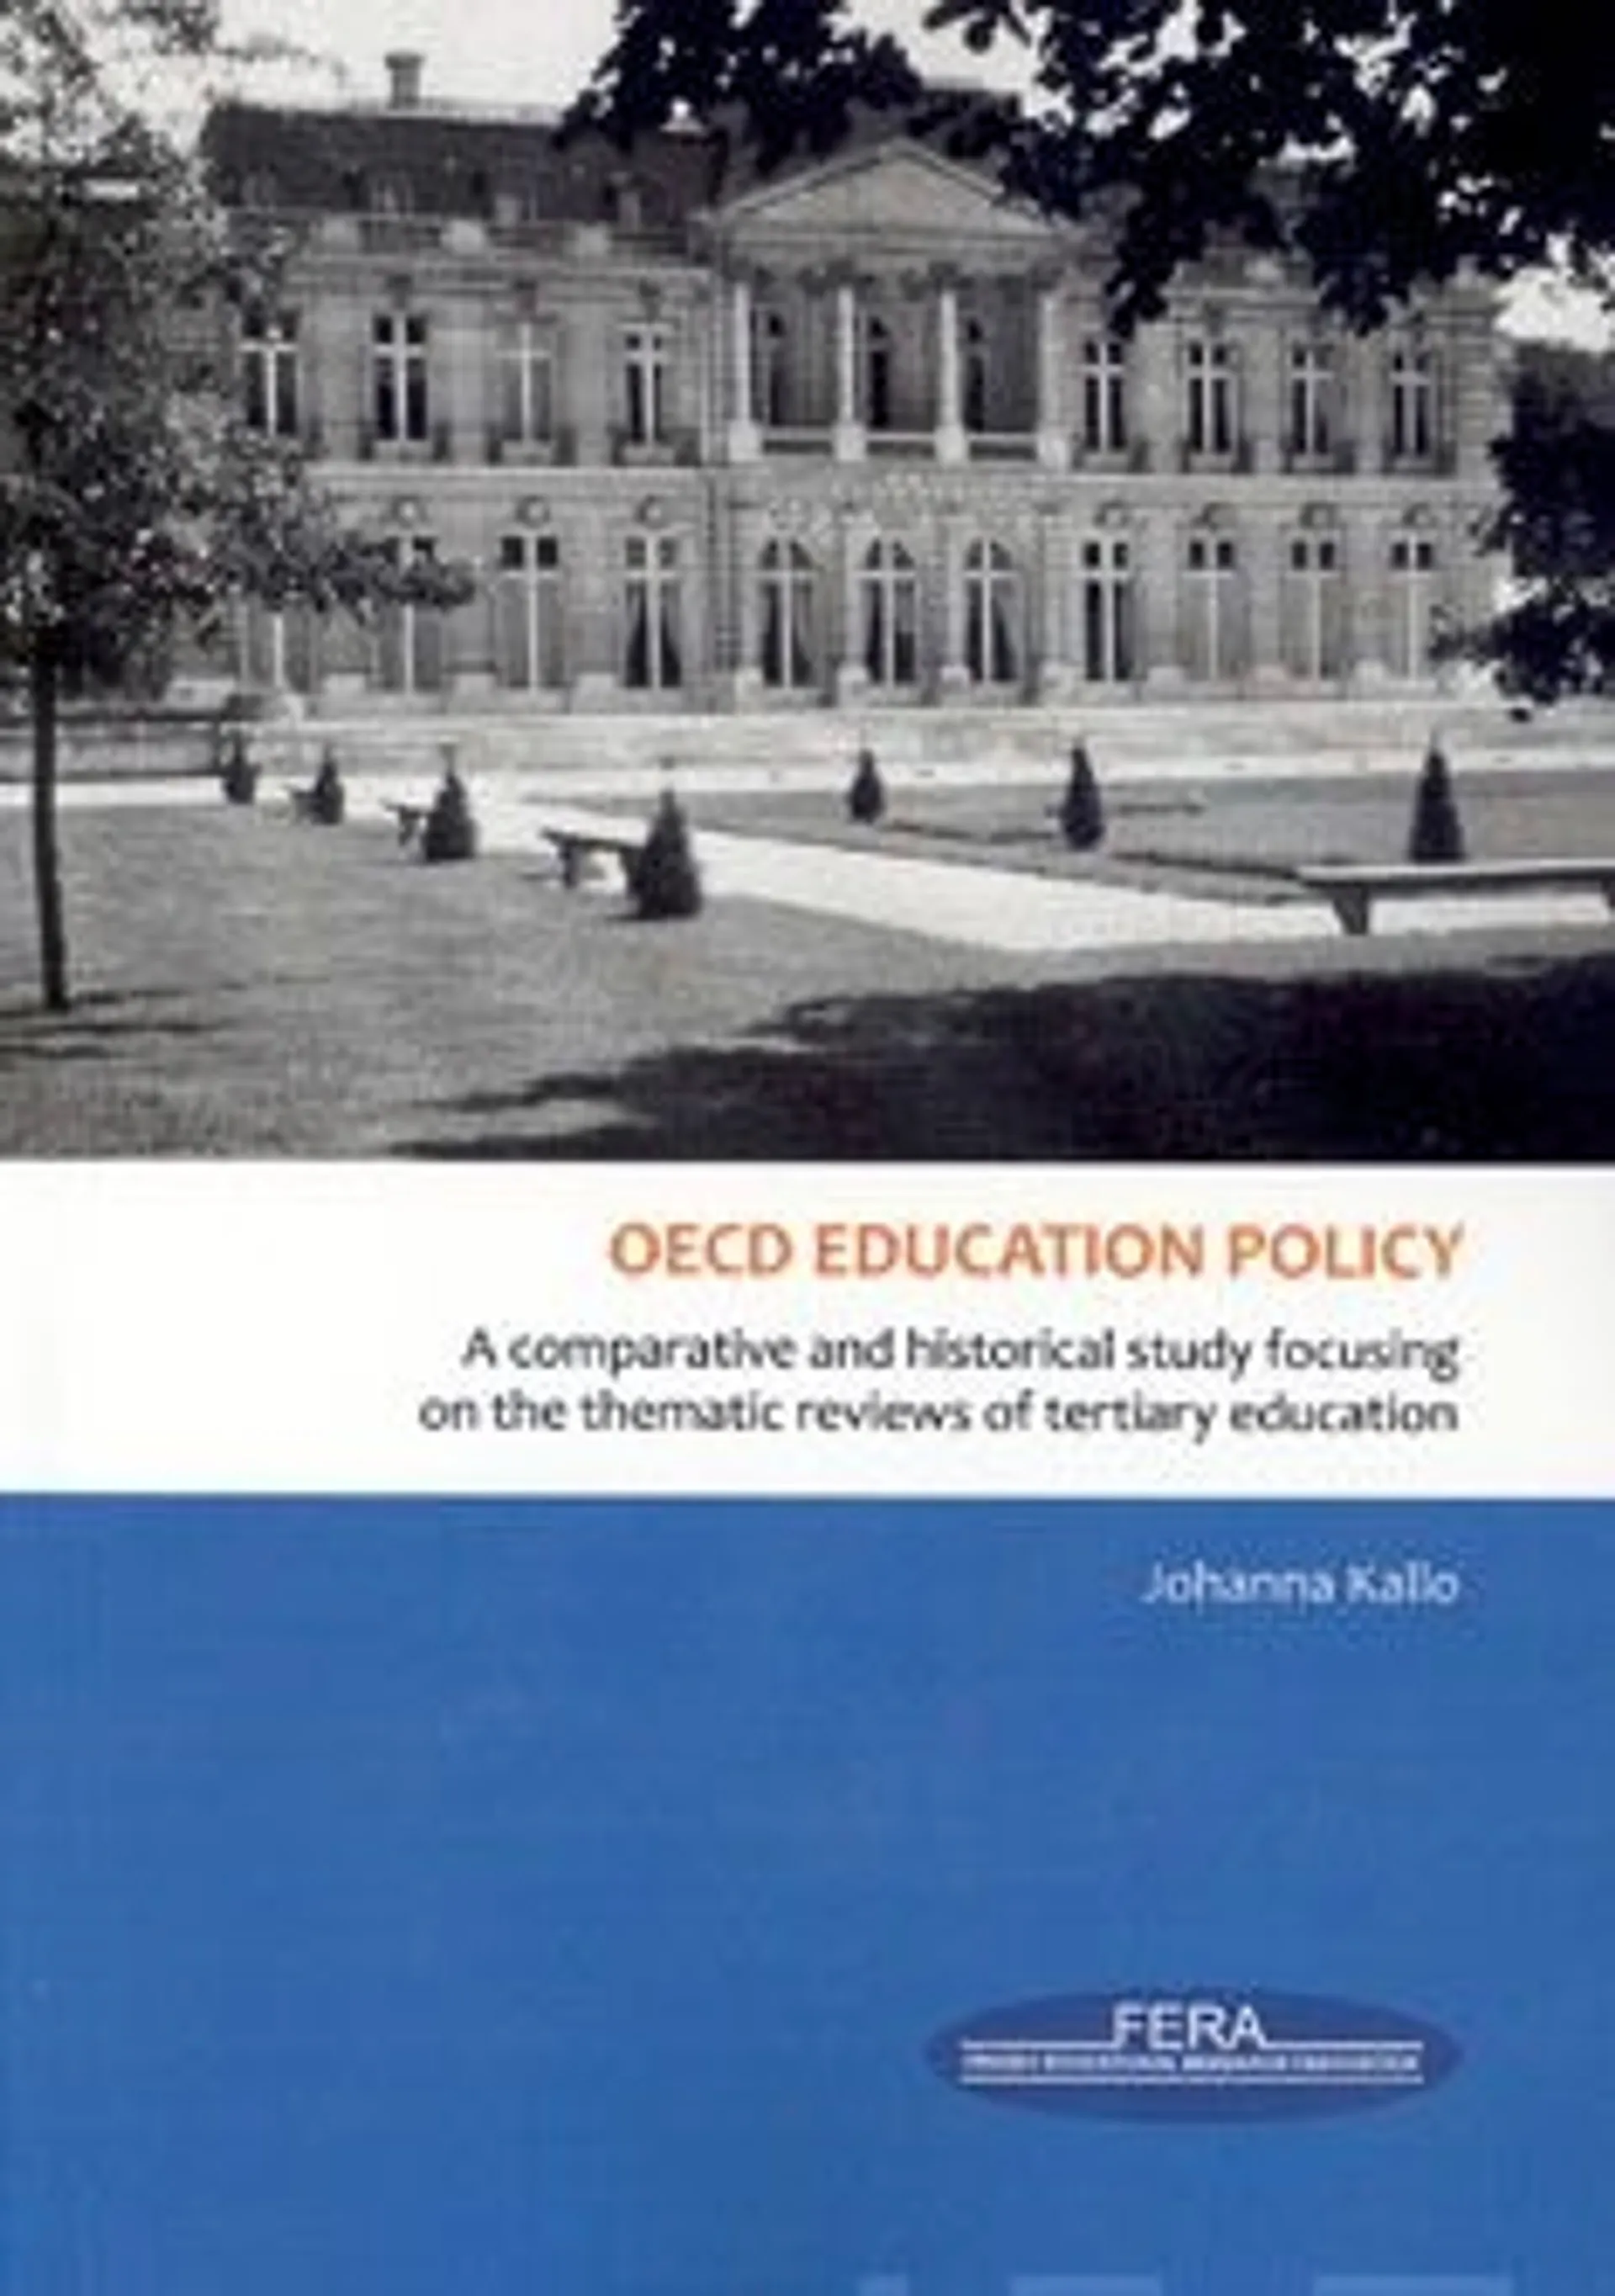 Kallo, OECD education policy - a comparative and historical study focusing on the thematic reviews of tertiary education